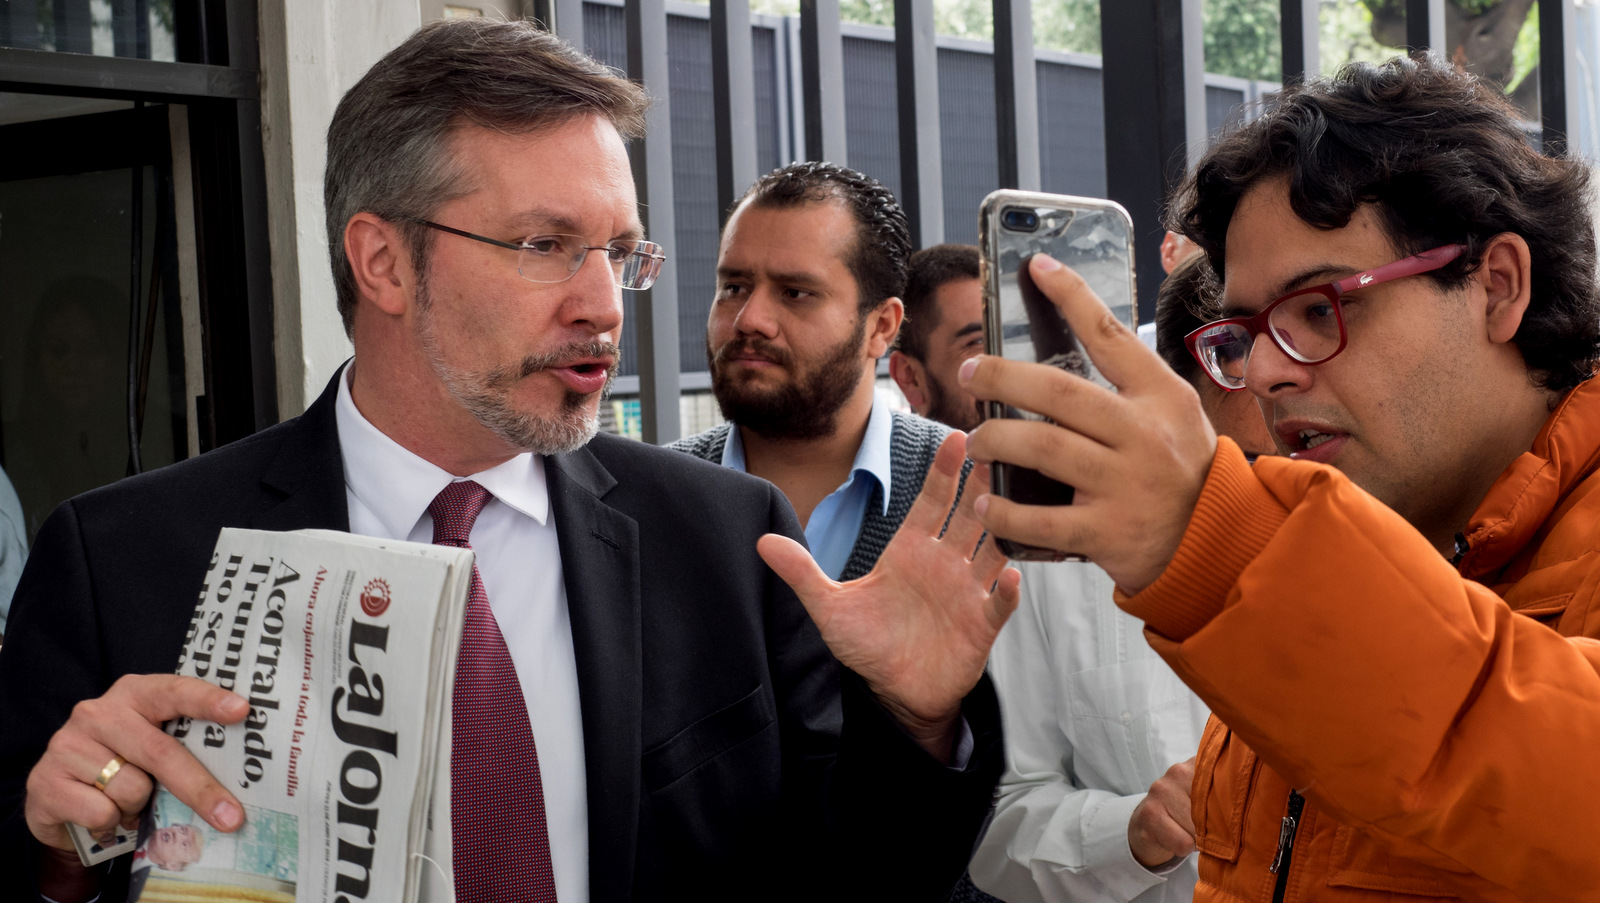 Law professor John Ackerman takes part in a livestream before delivering a letter to Mexico's National Electoral Institute demanding the authority take action against election fraud, Mexico City, June 21, 2018.